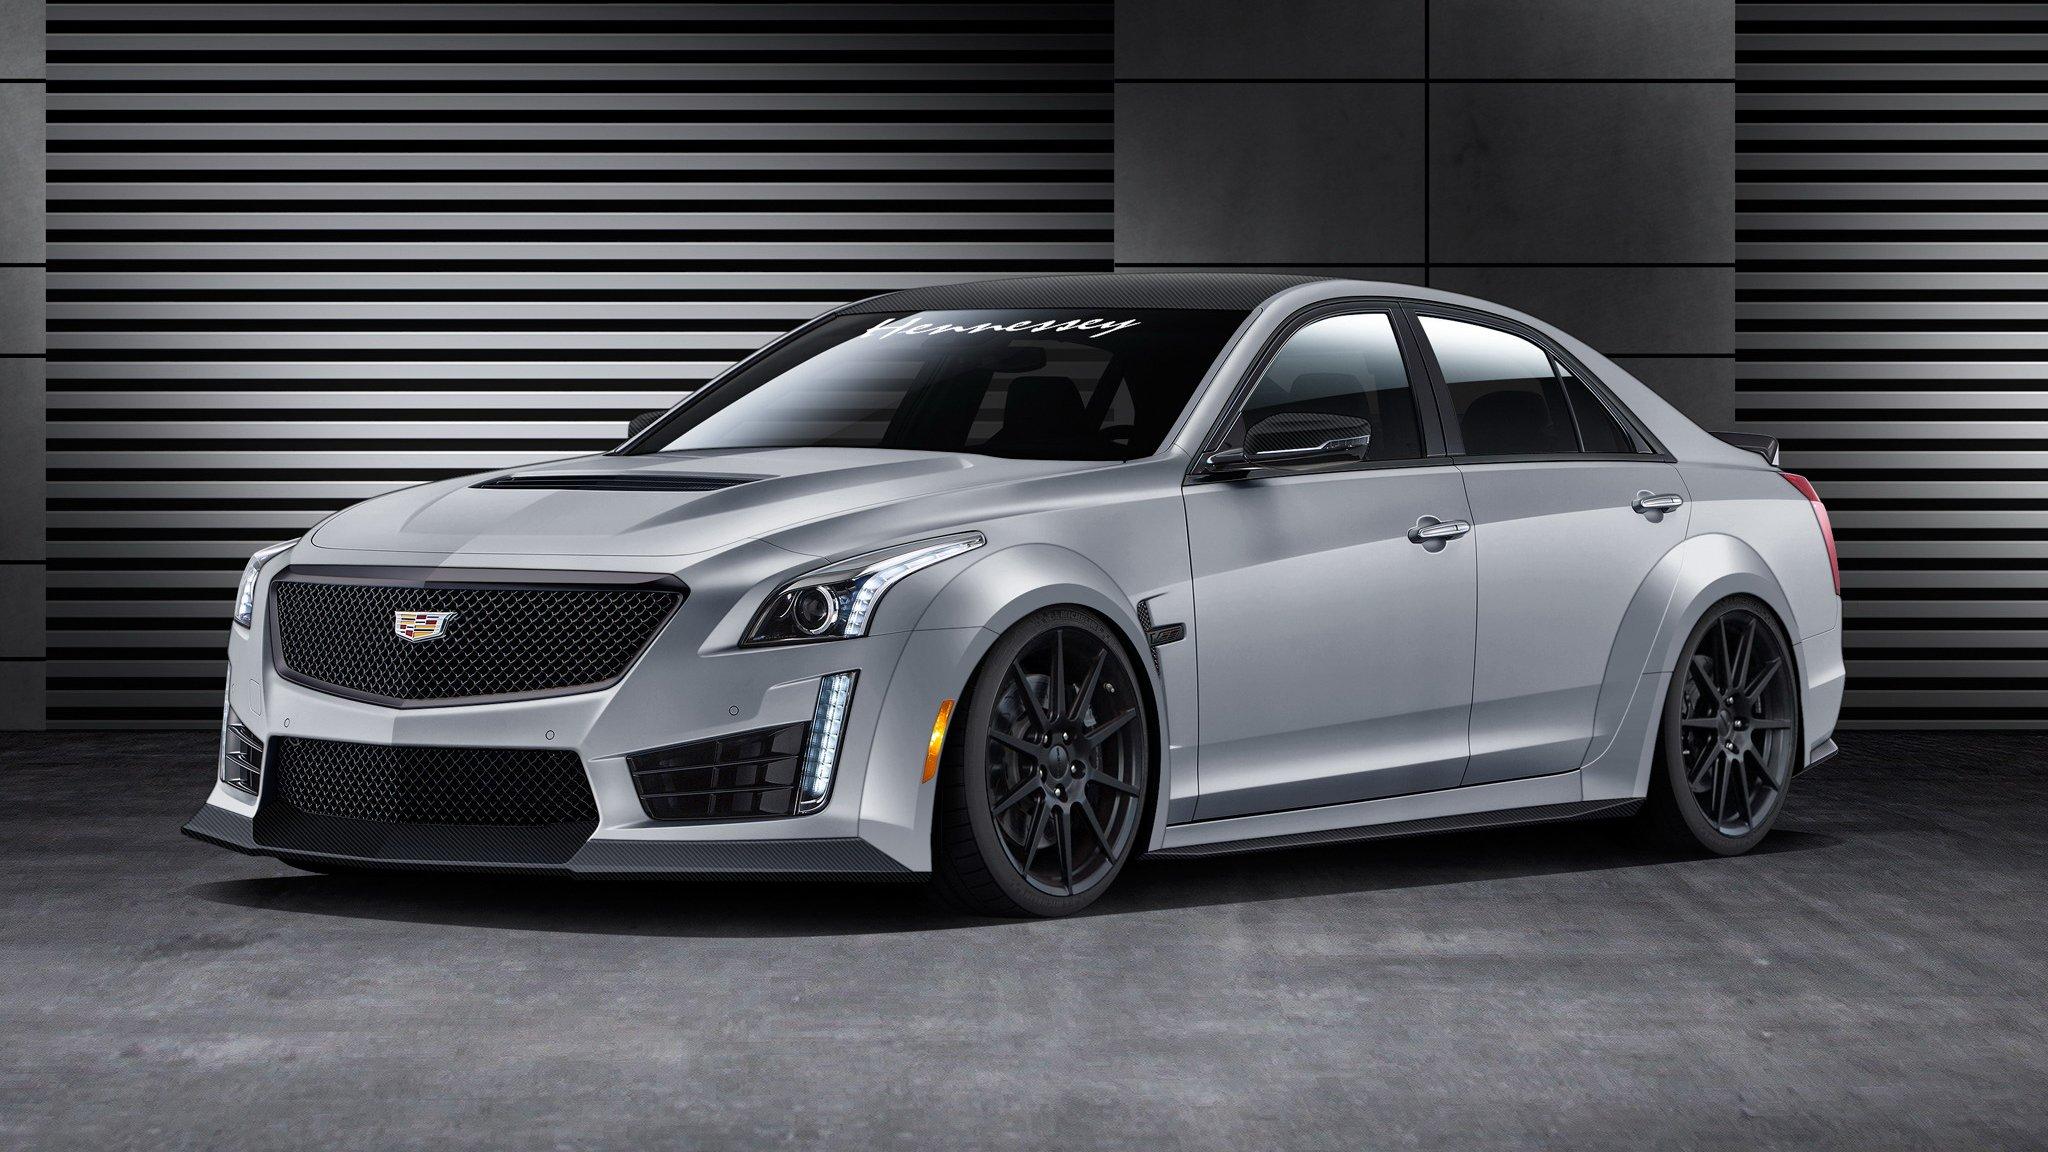 Download Cadillac Cts V wallpapers for mobile phone free Cadillac Cts V  HD pictures